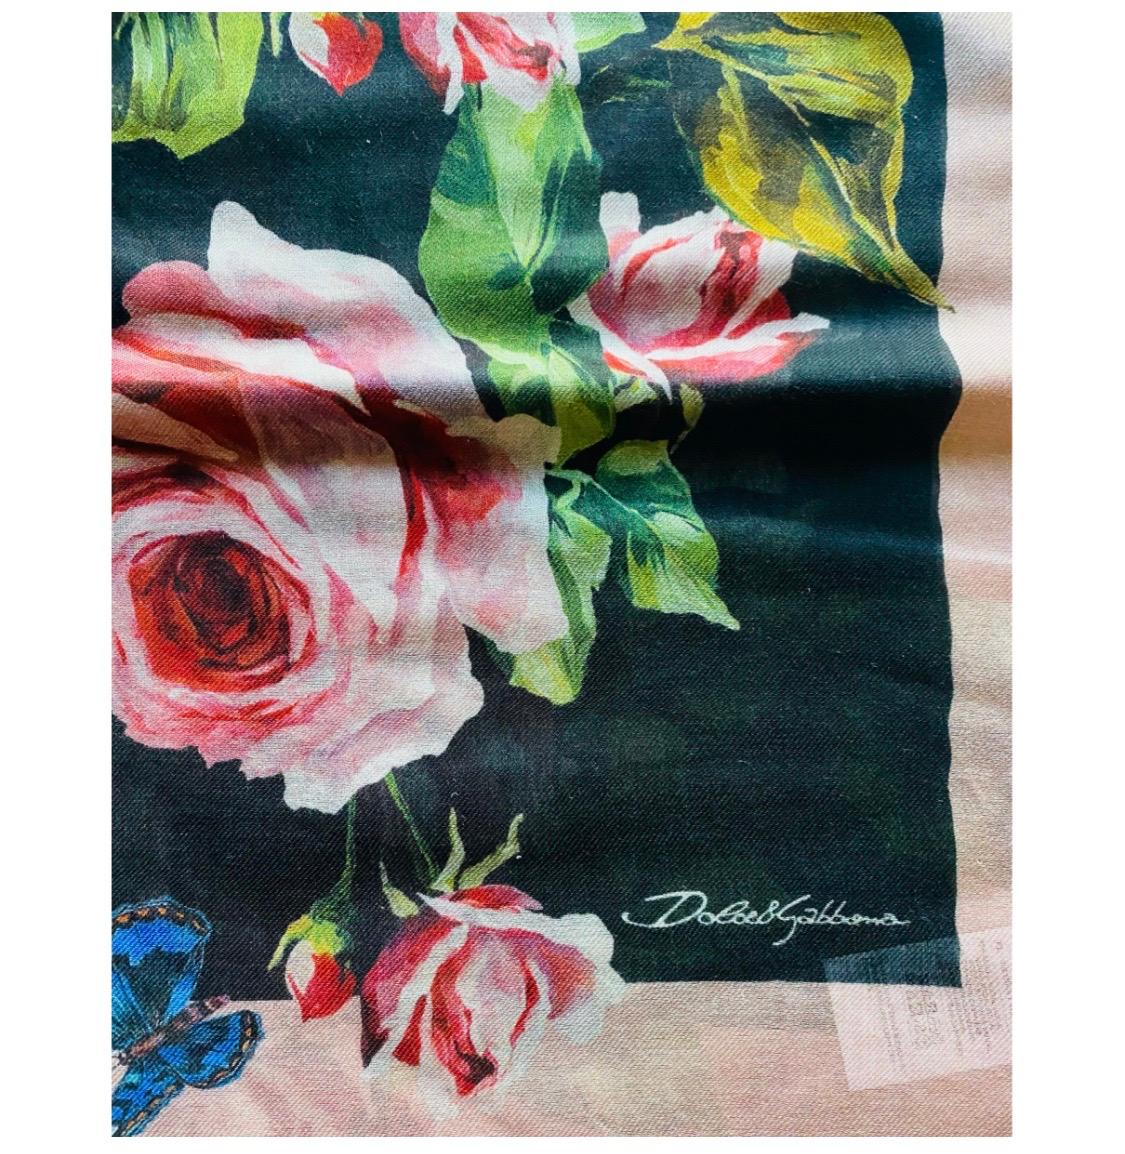 Dolce & Gabbana Pink Rose
Butterfly printed cashmere modal
blended scarf wrap 1